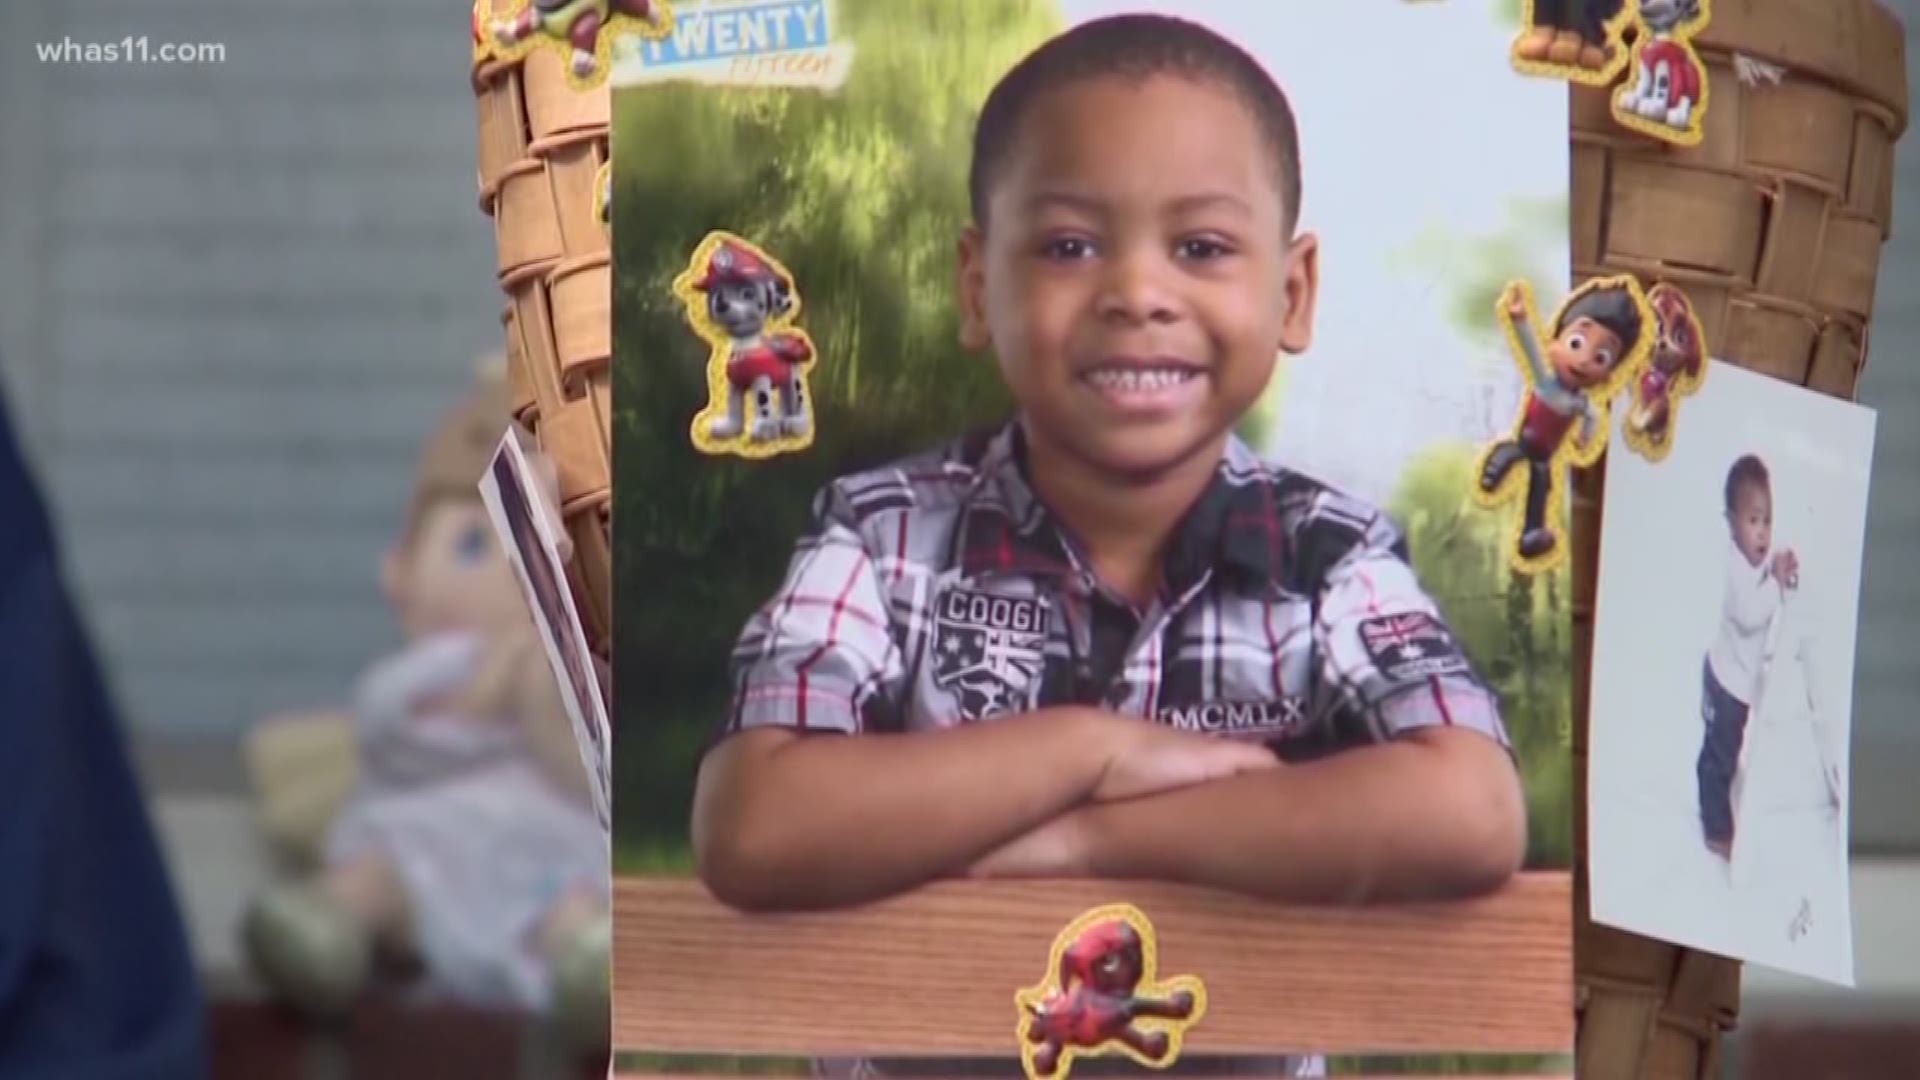 It's been one year since 7-year-old DeQuante Hobbs was killed by a stray bullet while sitting in his home in the Russell neighborhood.